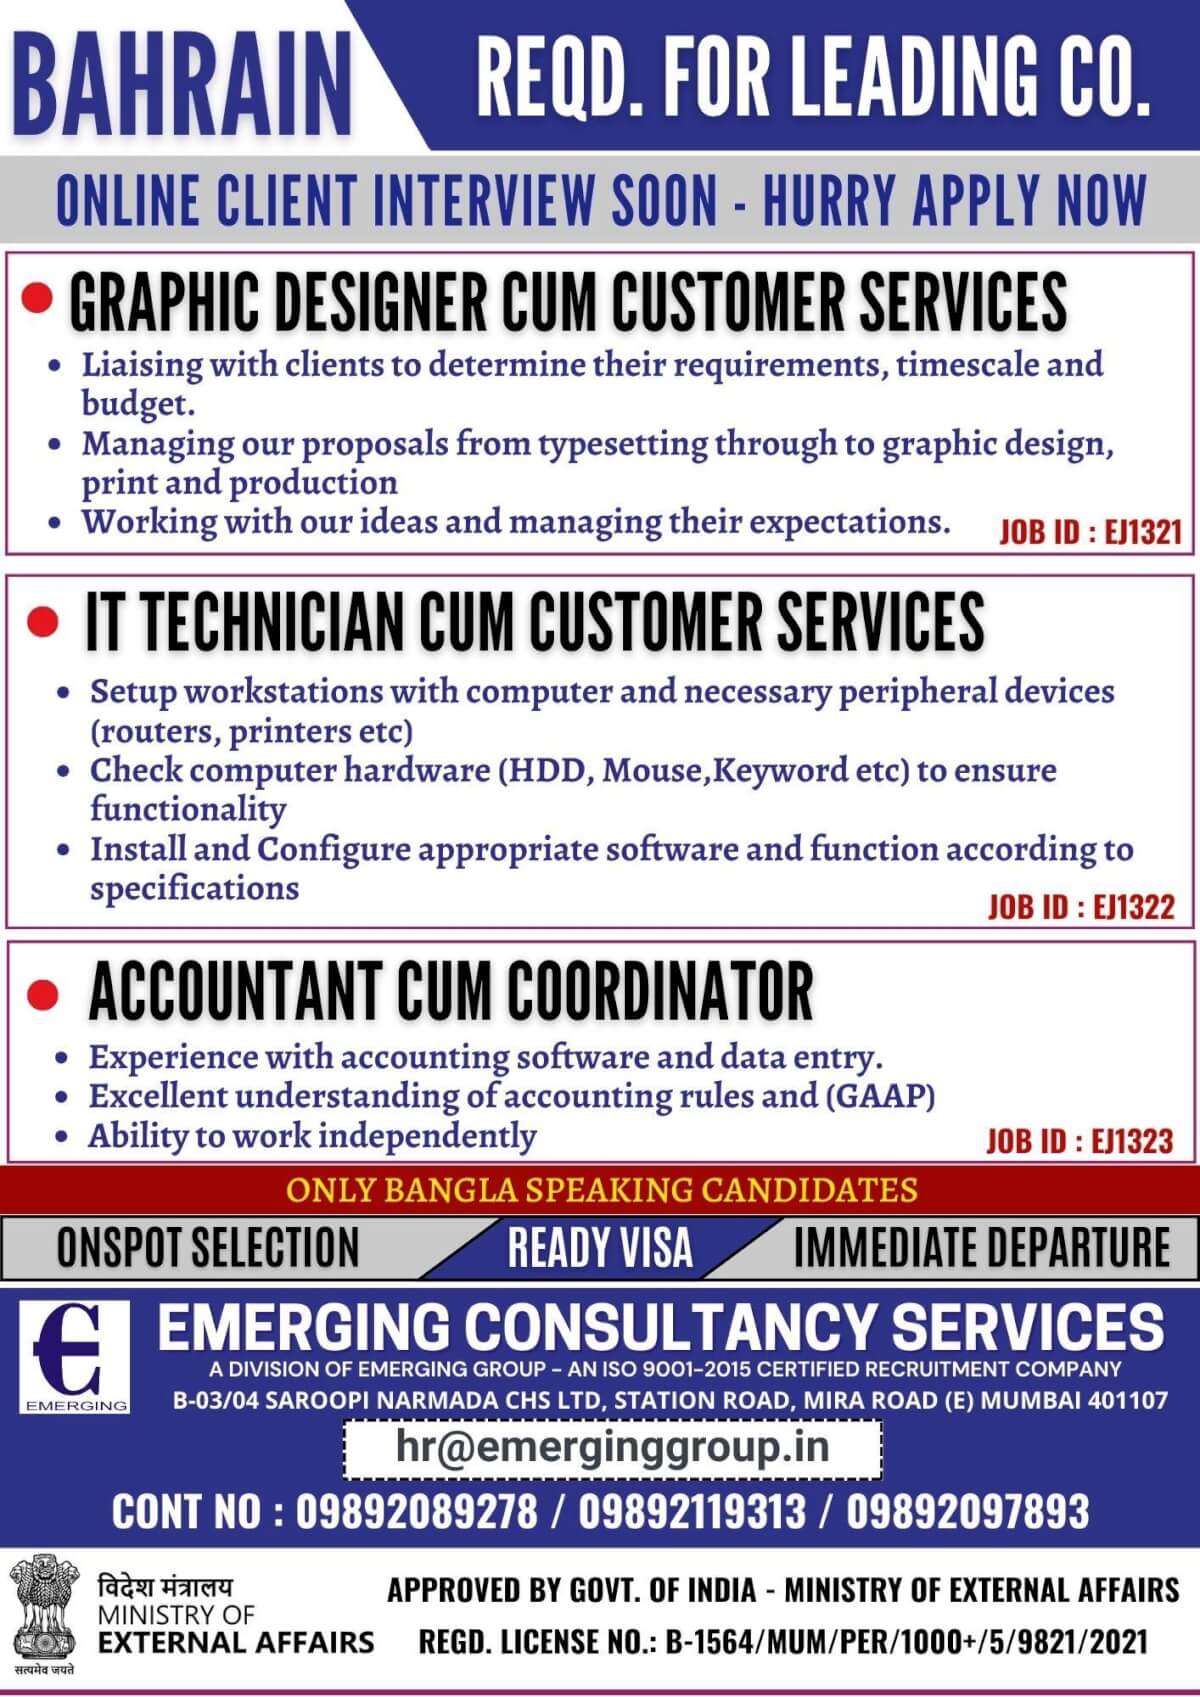 URGENTLY REQUIRED FOR LEADING COMPANY IN BAHRAIN